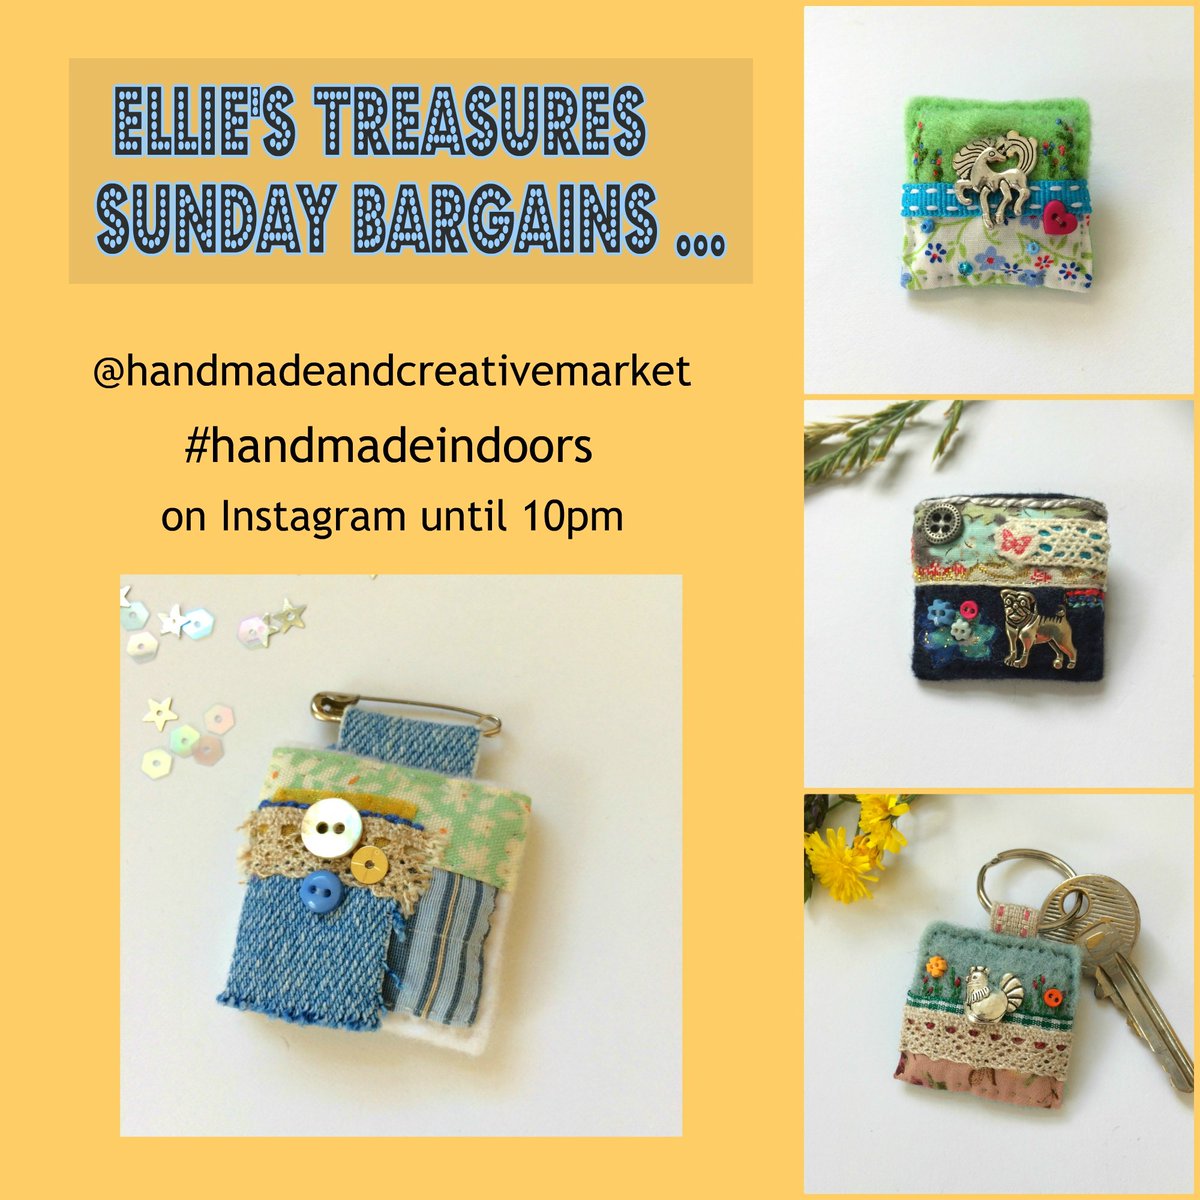 Evening #ukcraftershour and #HandmadeHour - quickly popping in to tell you about a super online fair over on Instagram at the moment until 10pm (use hashtag handmadeindoors to see everything).  I have a few little items up at sale prices tonight - have a lovely evening!